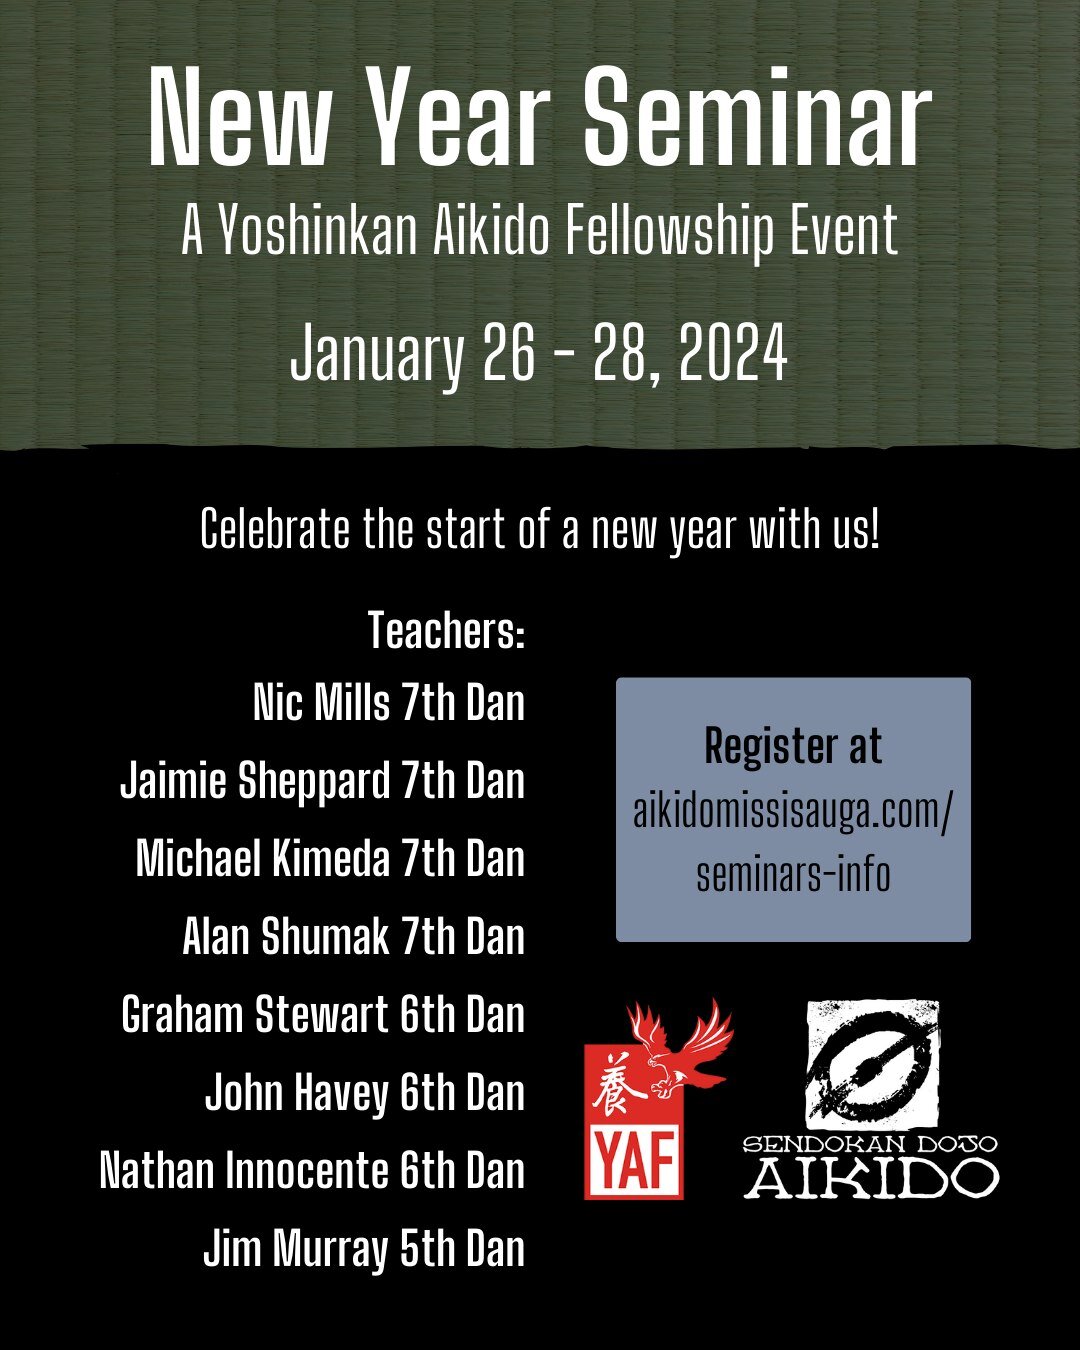 There is a Yoshinkan aikido seminar next weekend featuring a lineup of 8 high ranking instructors hosted by our friends, the phenomenal Sendokan Dojo (@sendokandojo)! Our team will be visiting and we hope to see many old familiar faces, and make some